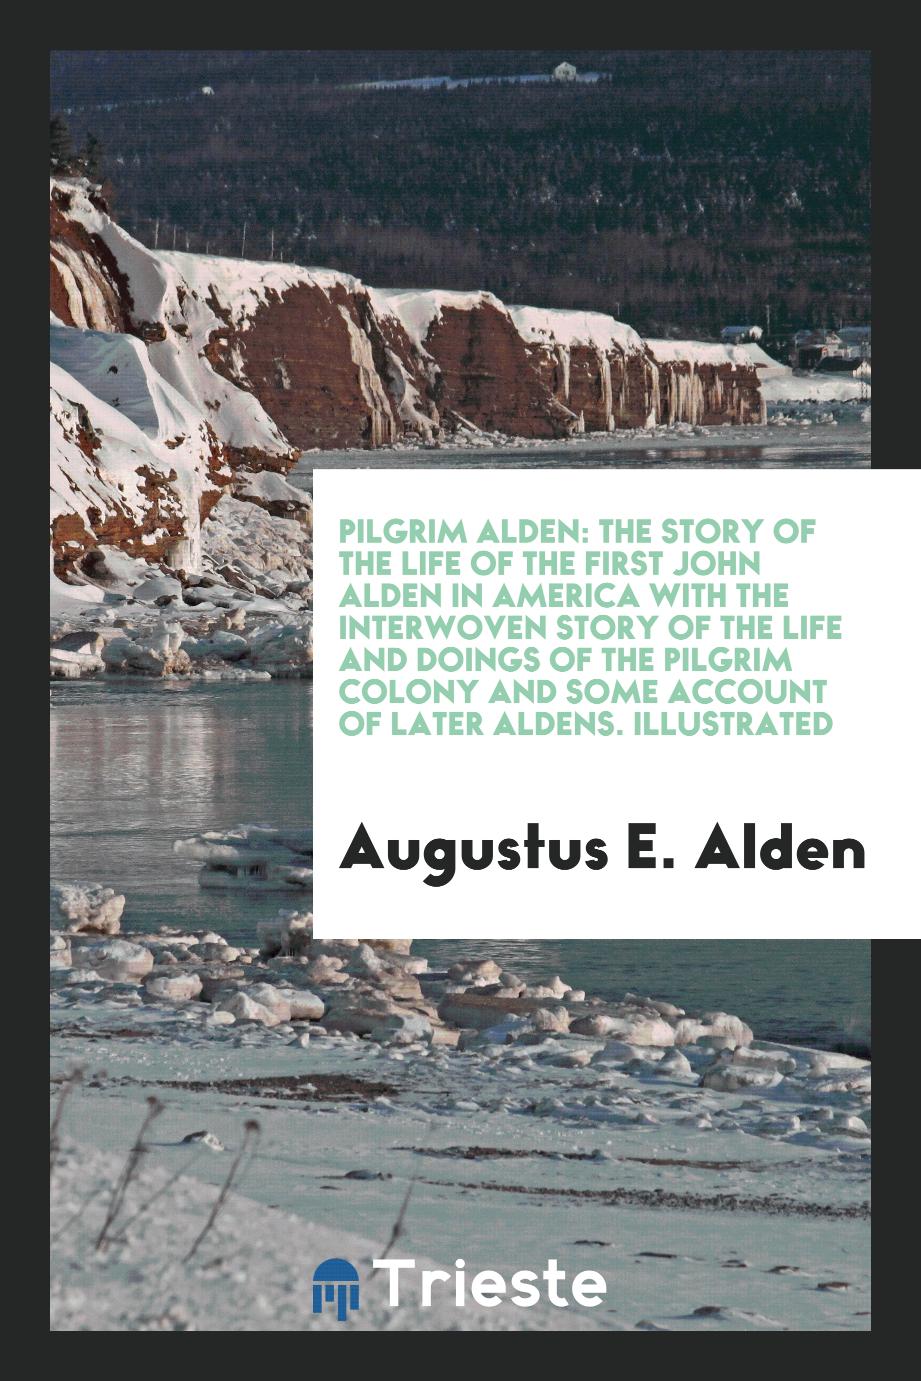 Pilgrim Alden: The Story of the Life of the First John Alden in America with the Interwoven Story of the Life and Doings of the Pilgrim Colony and Some Account of Later Aldens. Illustrated